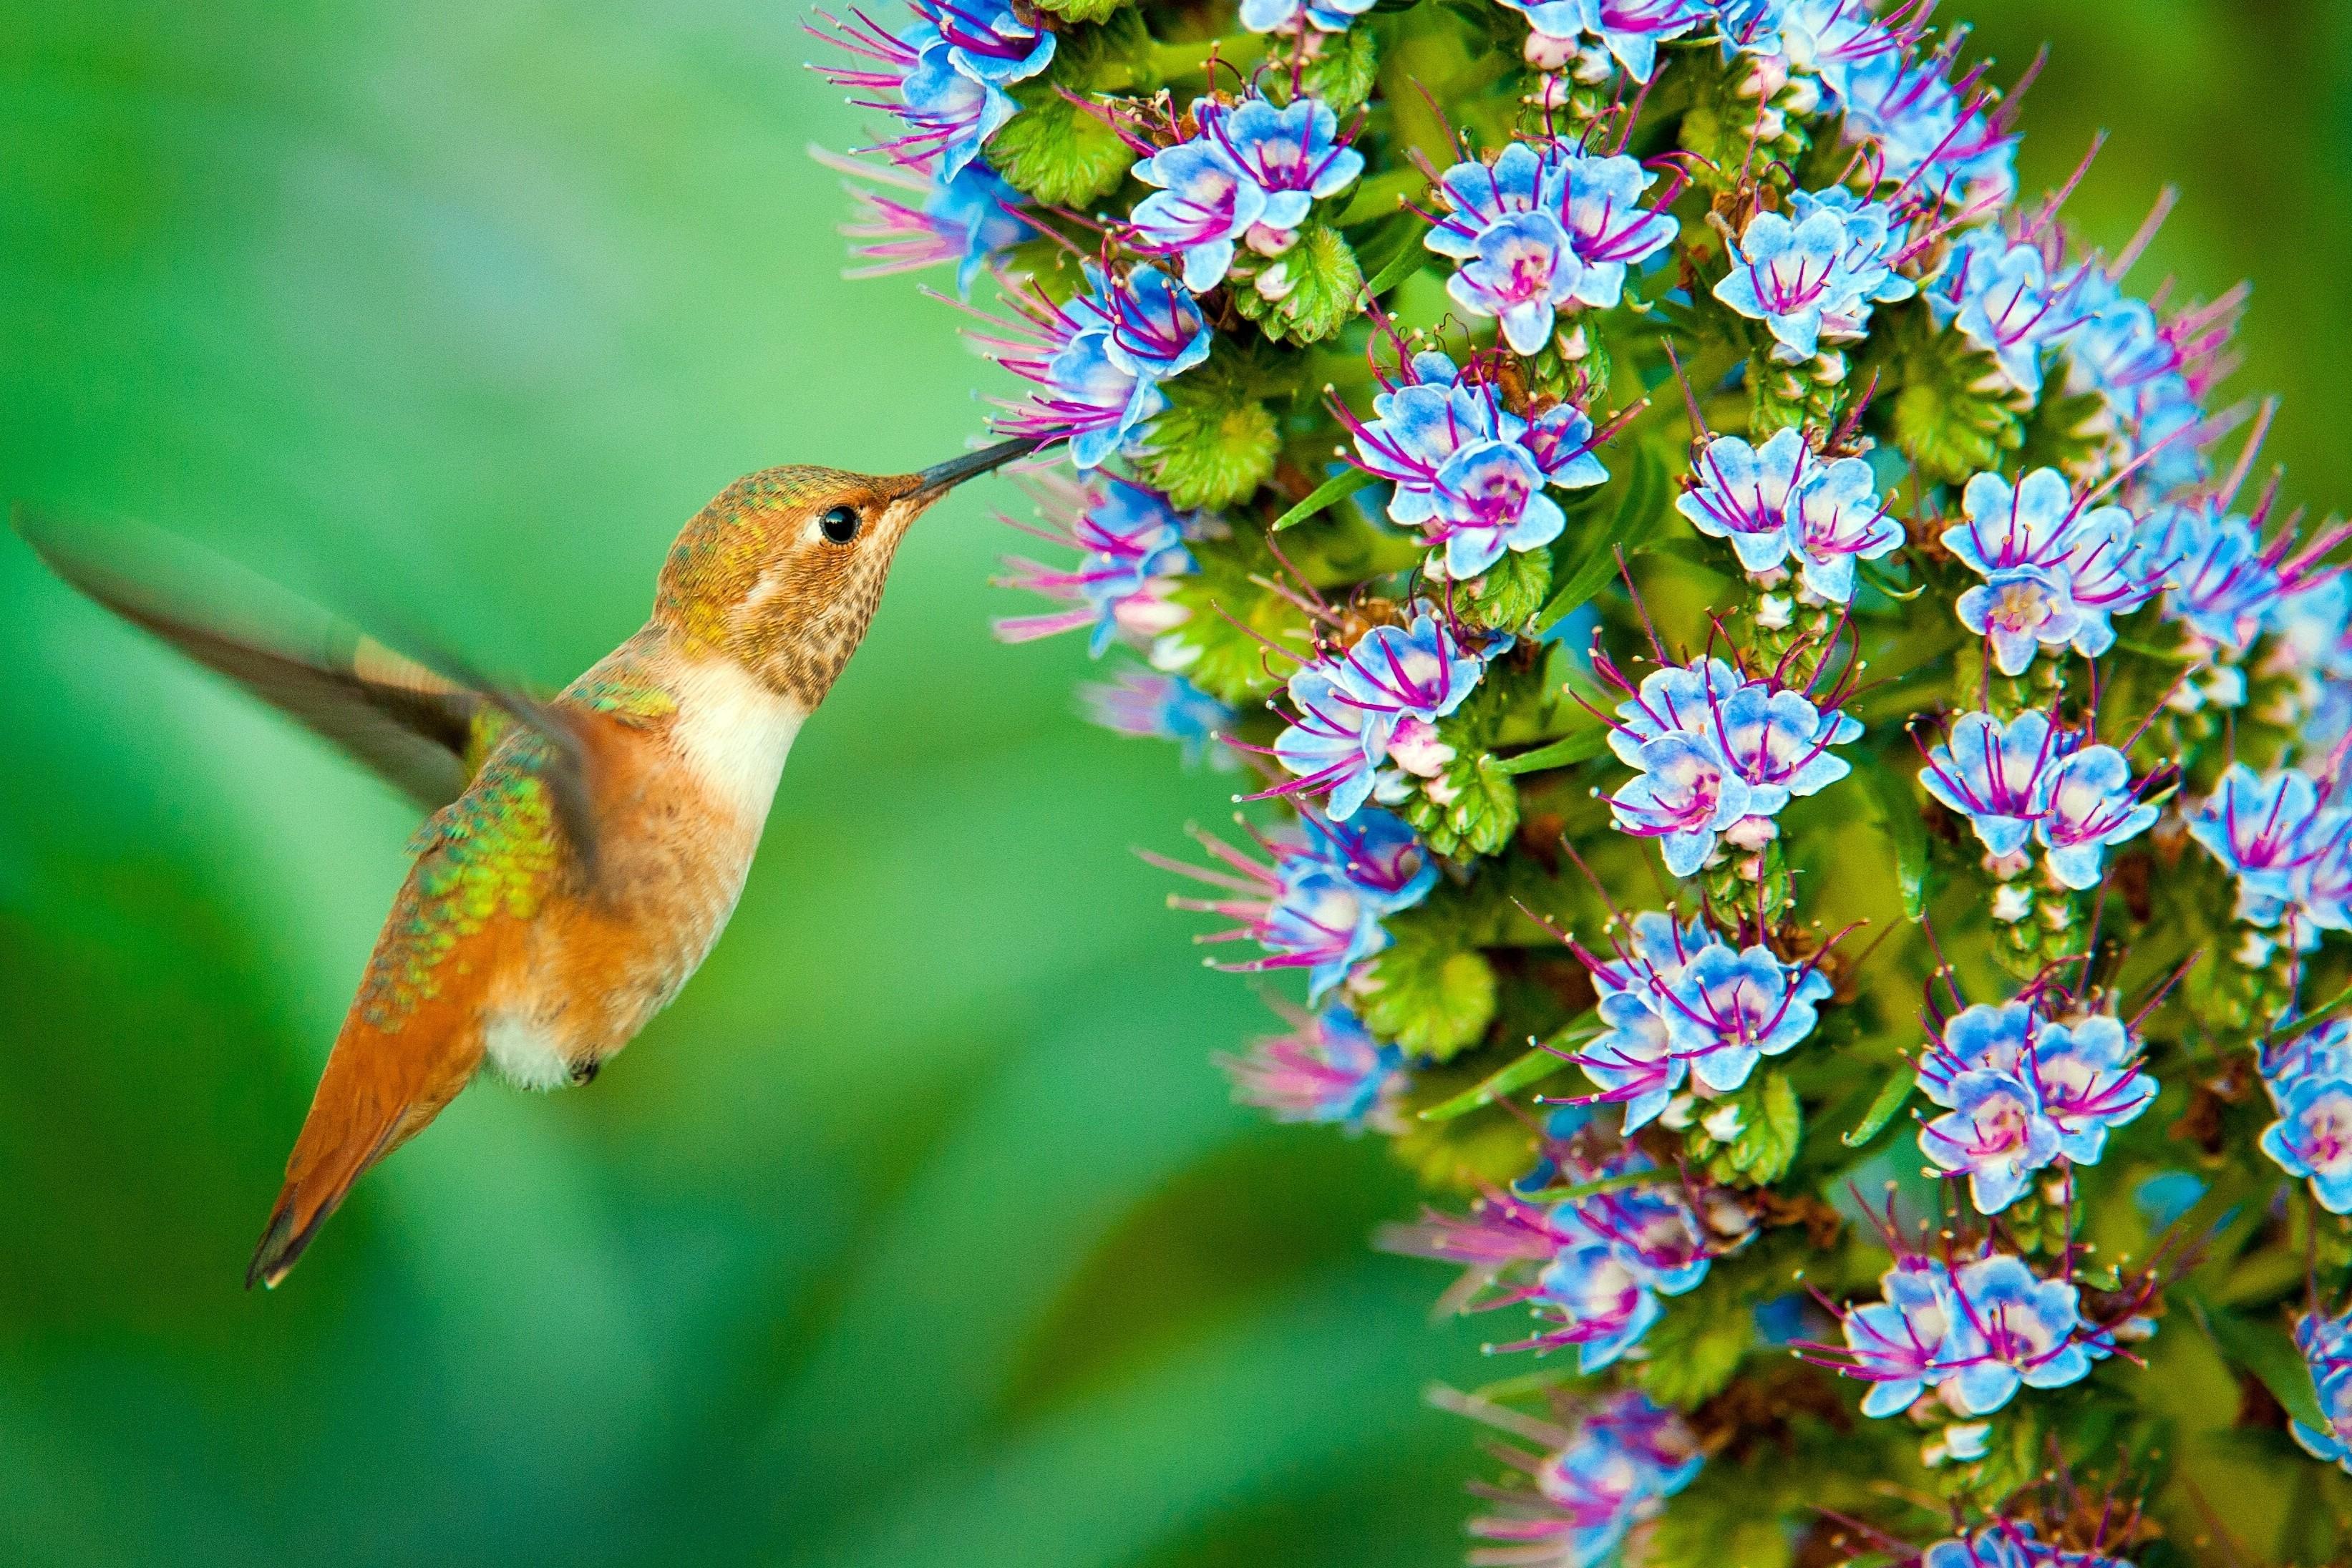 Flowers And Birds Wallpapers - Wallpaper Cave